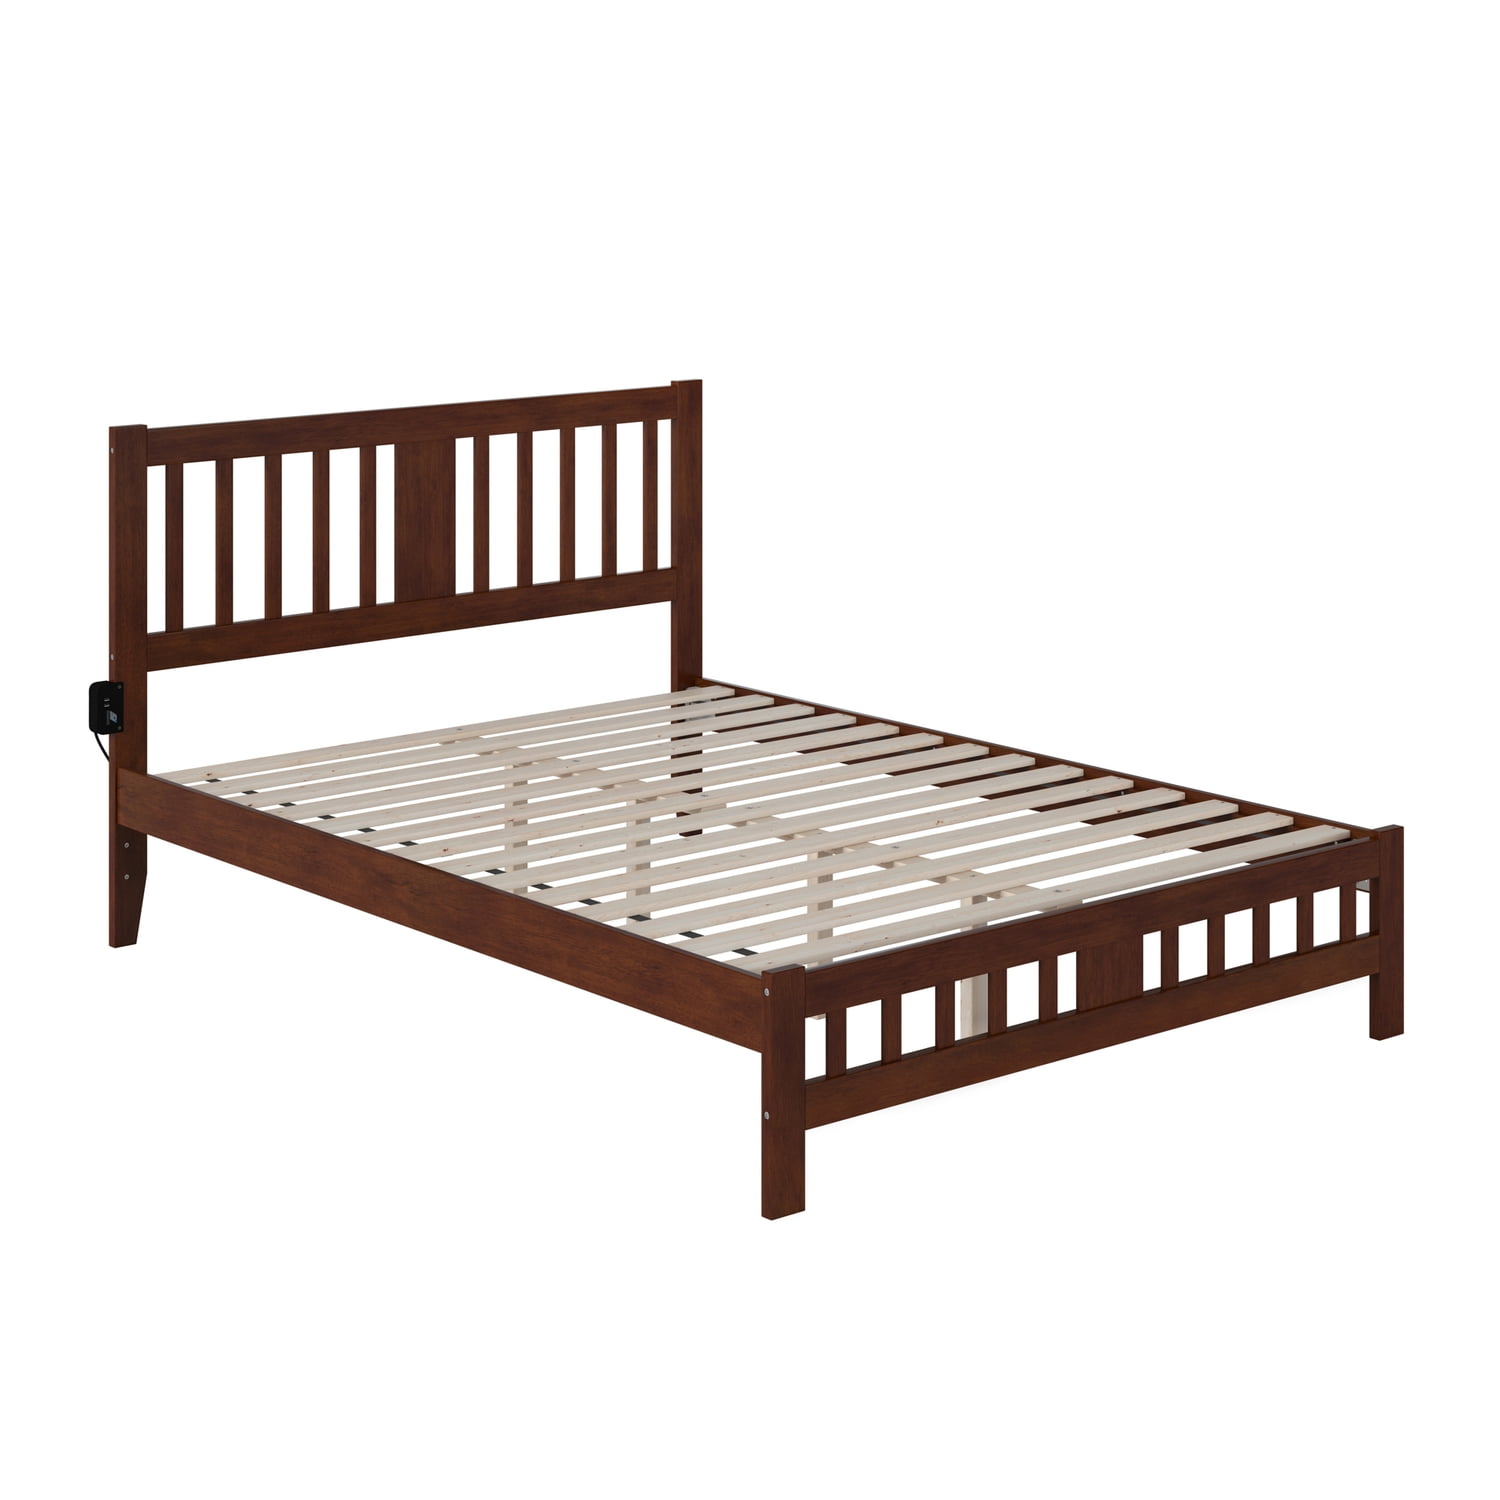 show original title Details about   Bed Unpainted Wooden Bed with Slatted Pine Wood Raw Single Bed Double Bed 